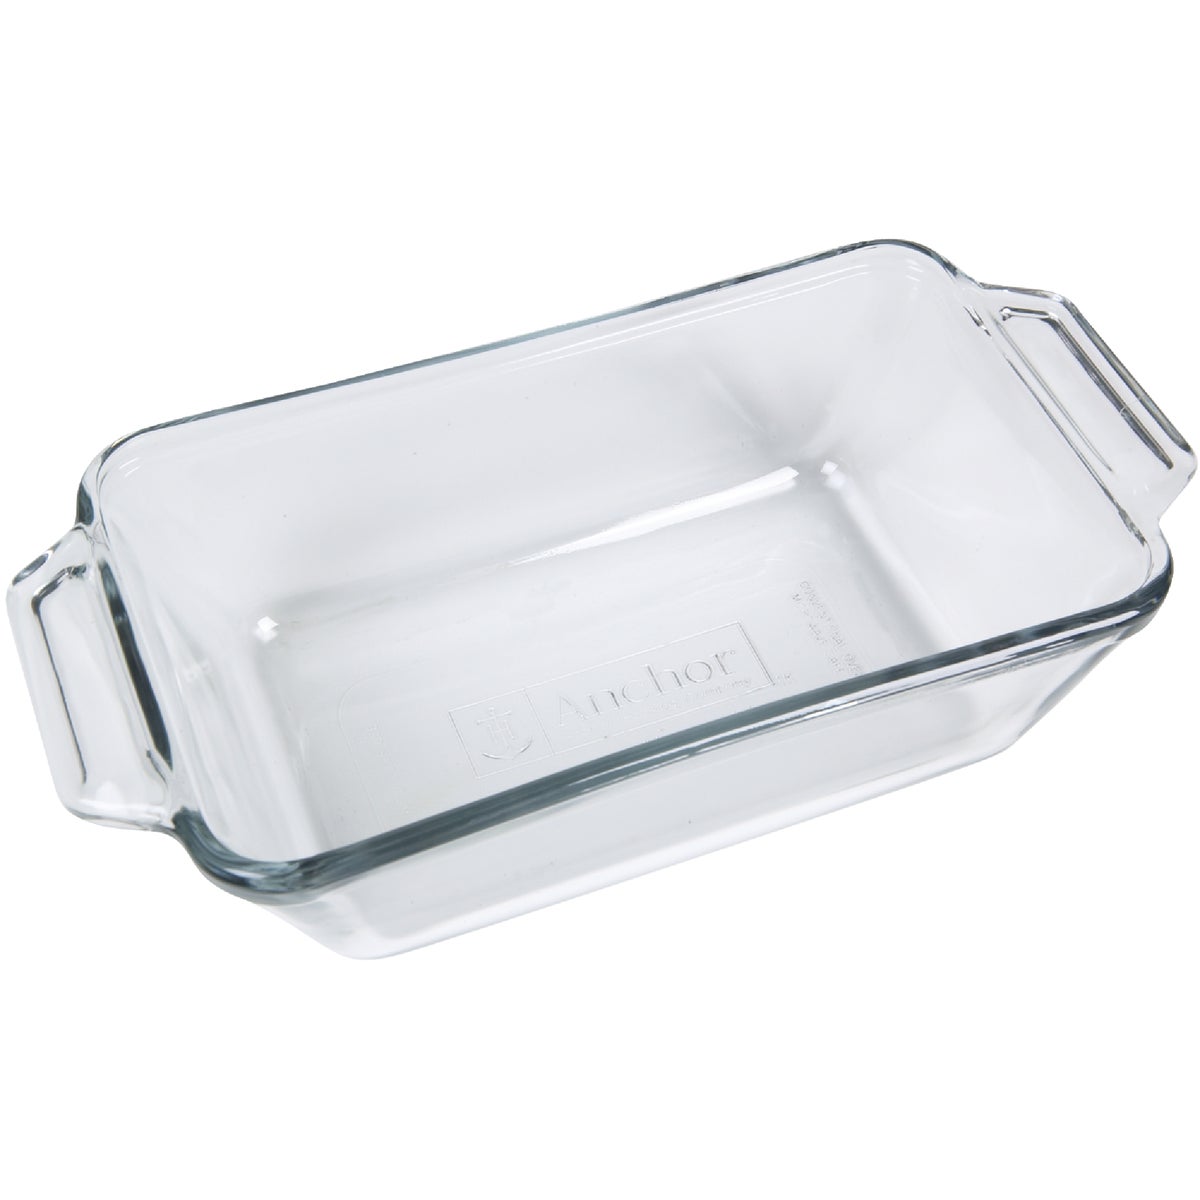 Anchor Hocking Oven Basics 1.5 Qt. 5 In. x 9 In. Glass Loaf Pan